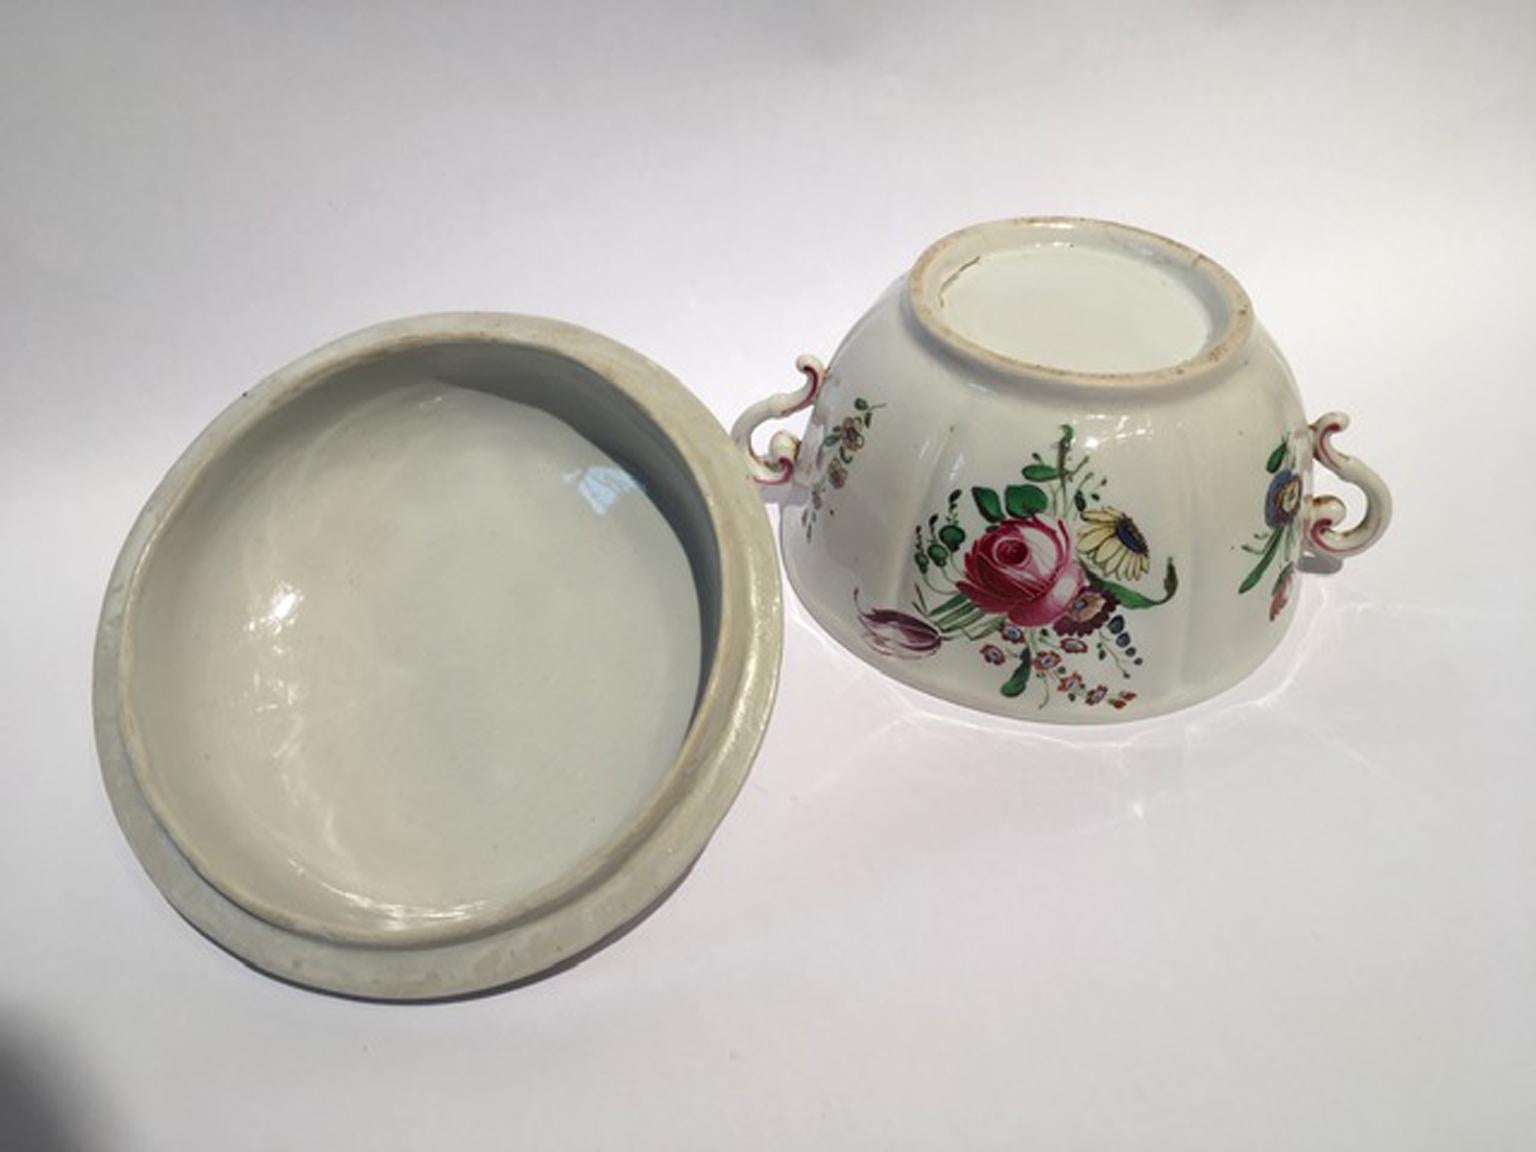 Hand-Crafted Italy 18th Century Richard Ginori Porcelain Sugar Bowl with Floral Drawings